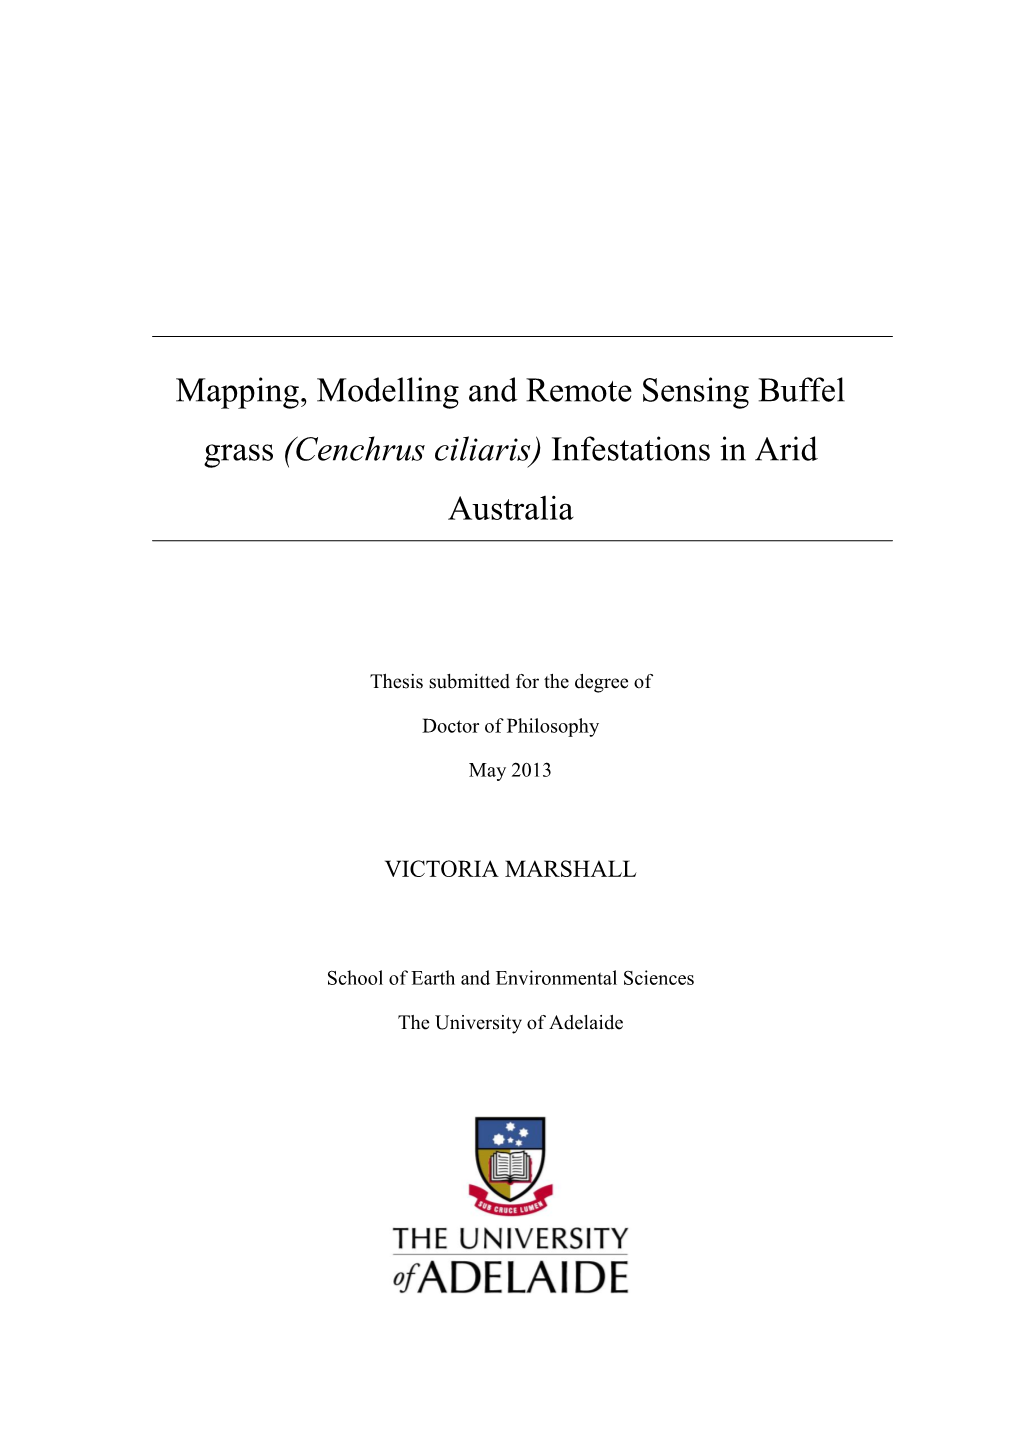 Mapping, Modelling and Remote Sensing Buffel Grass (Cenchrus Ciliaris) Infestations in Arid Australia